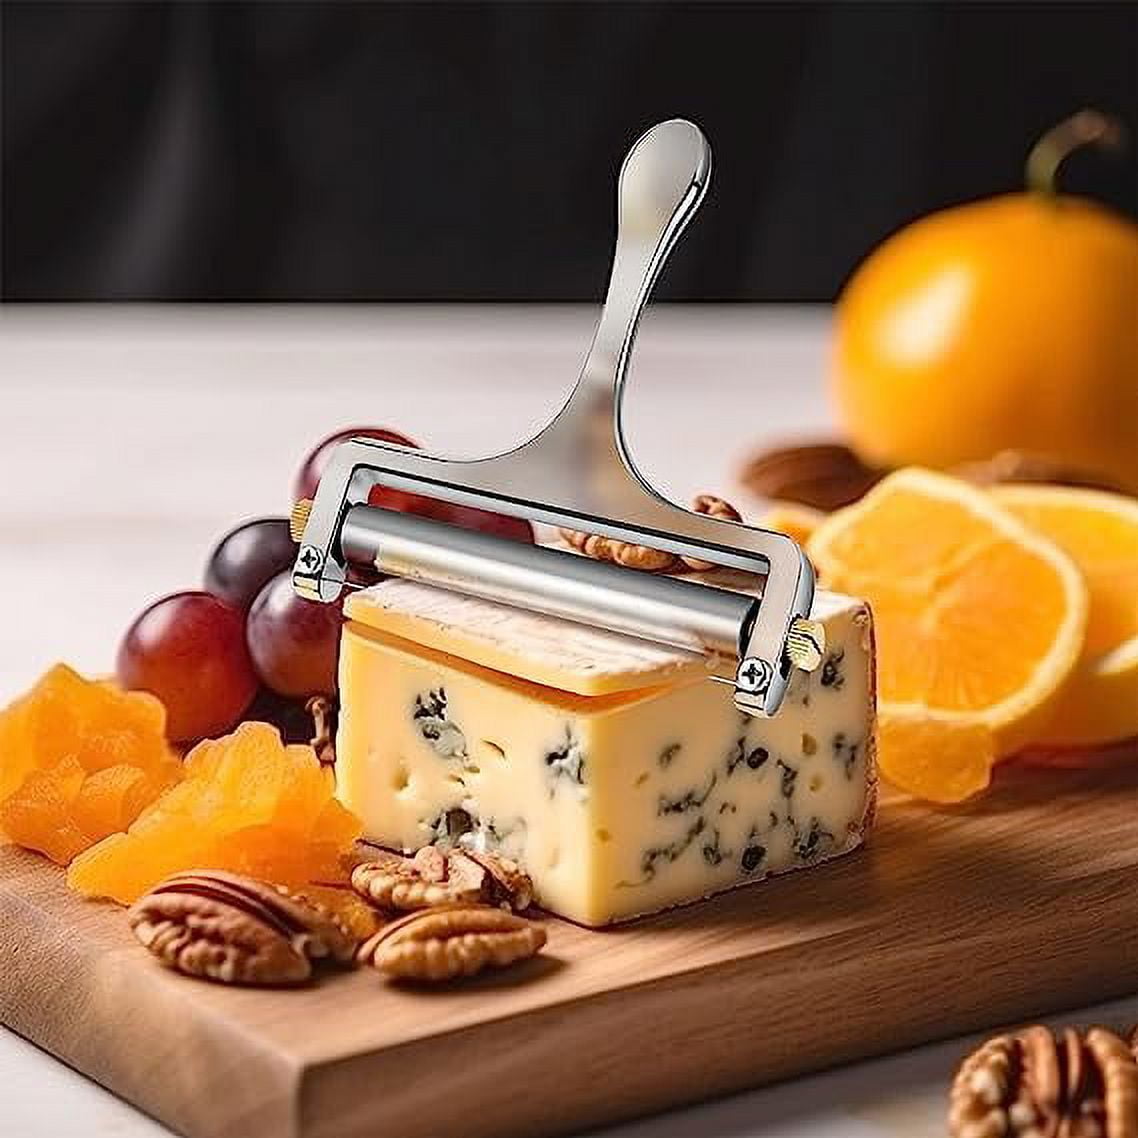 Stainless Steel Cheese Slicer, Handle,Adjustable Thickness Wire